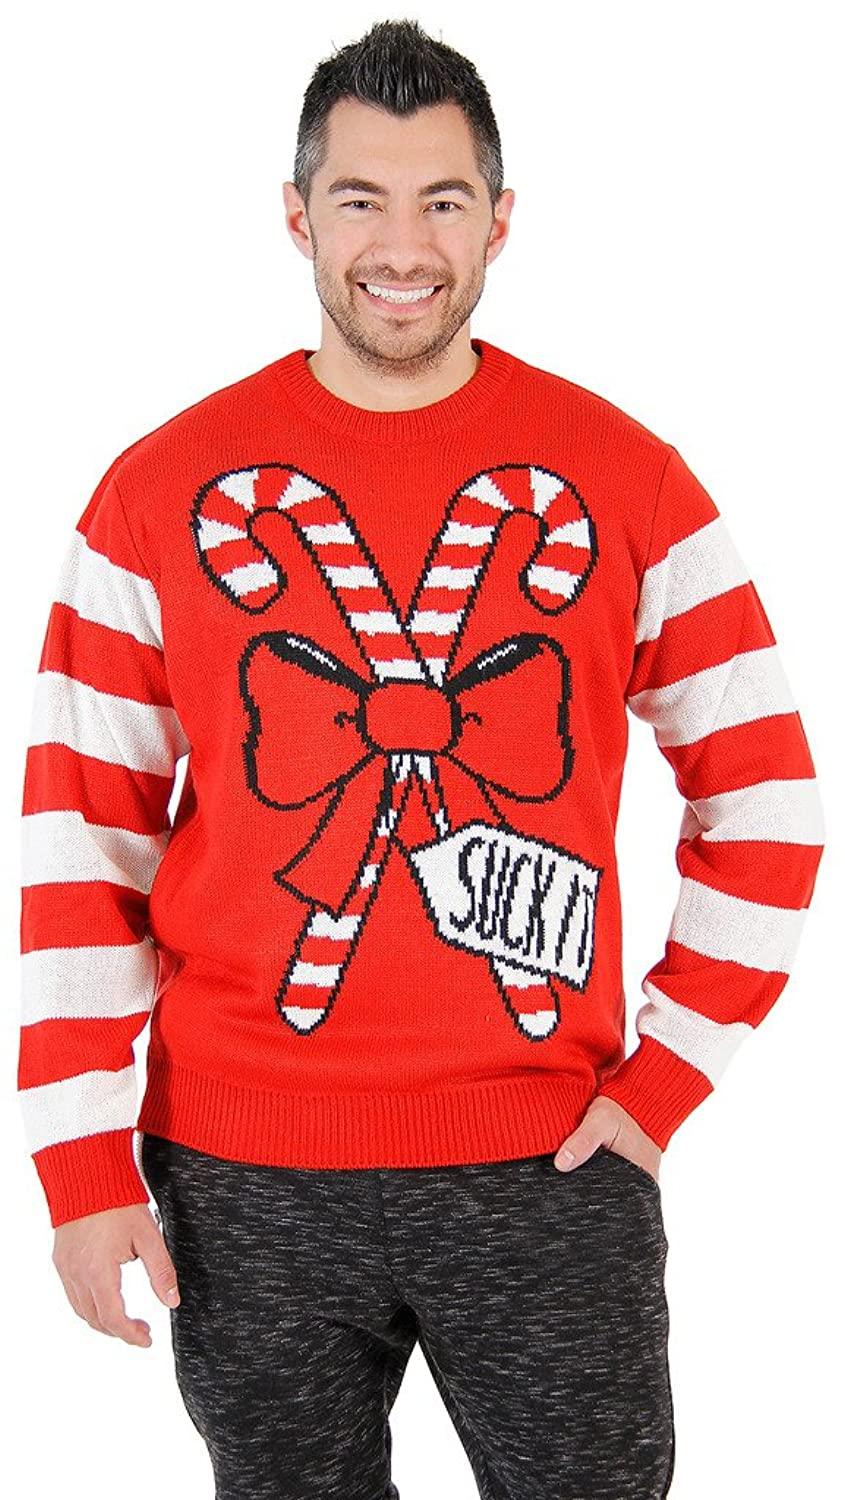 Suck It Candy Cane Ugly Christmas Sweater - TVStoreOnline